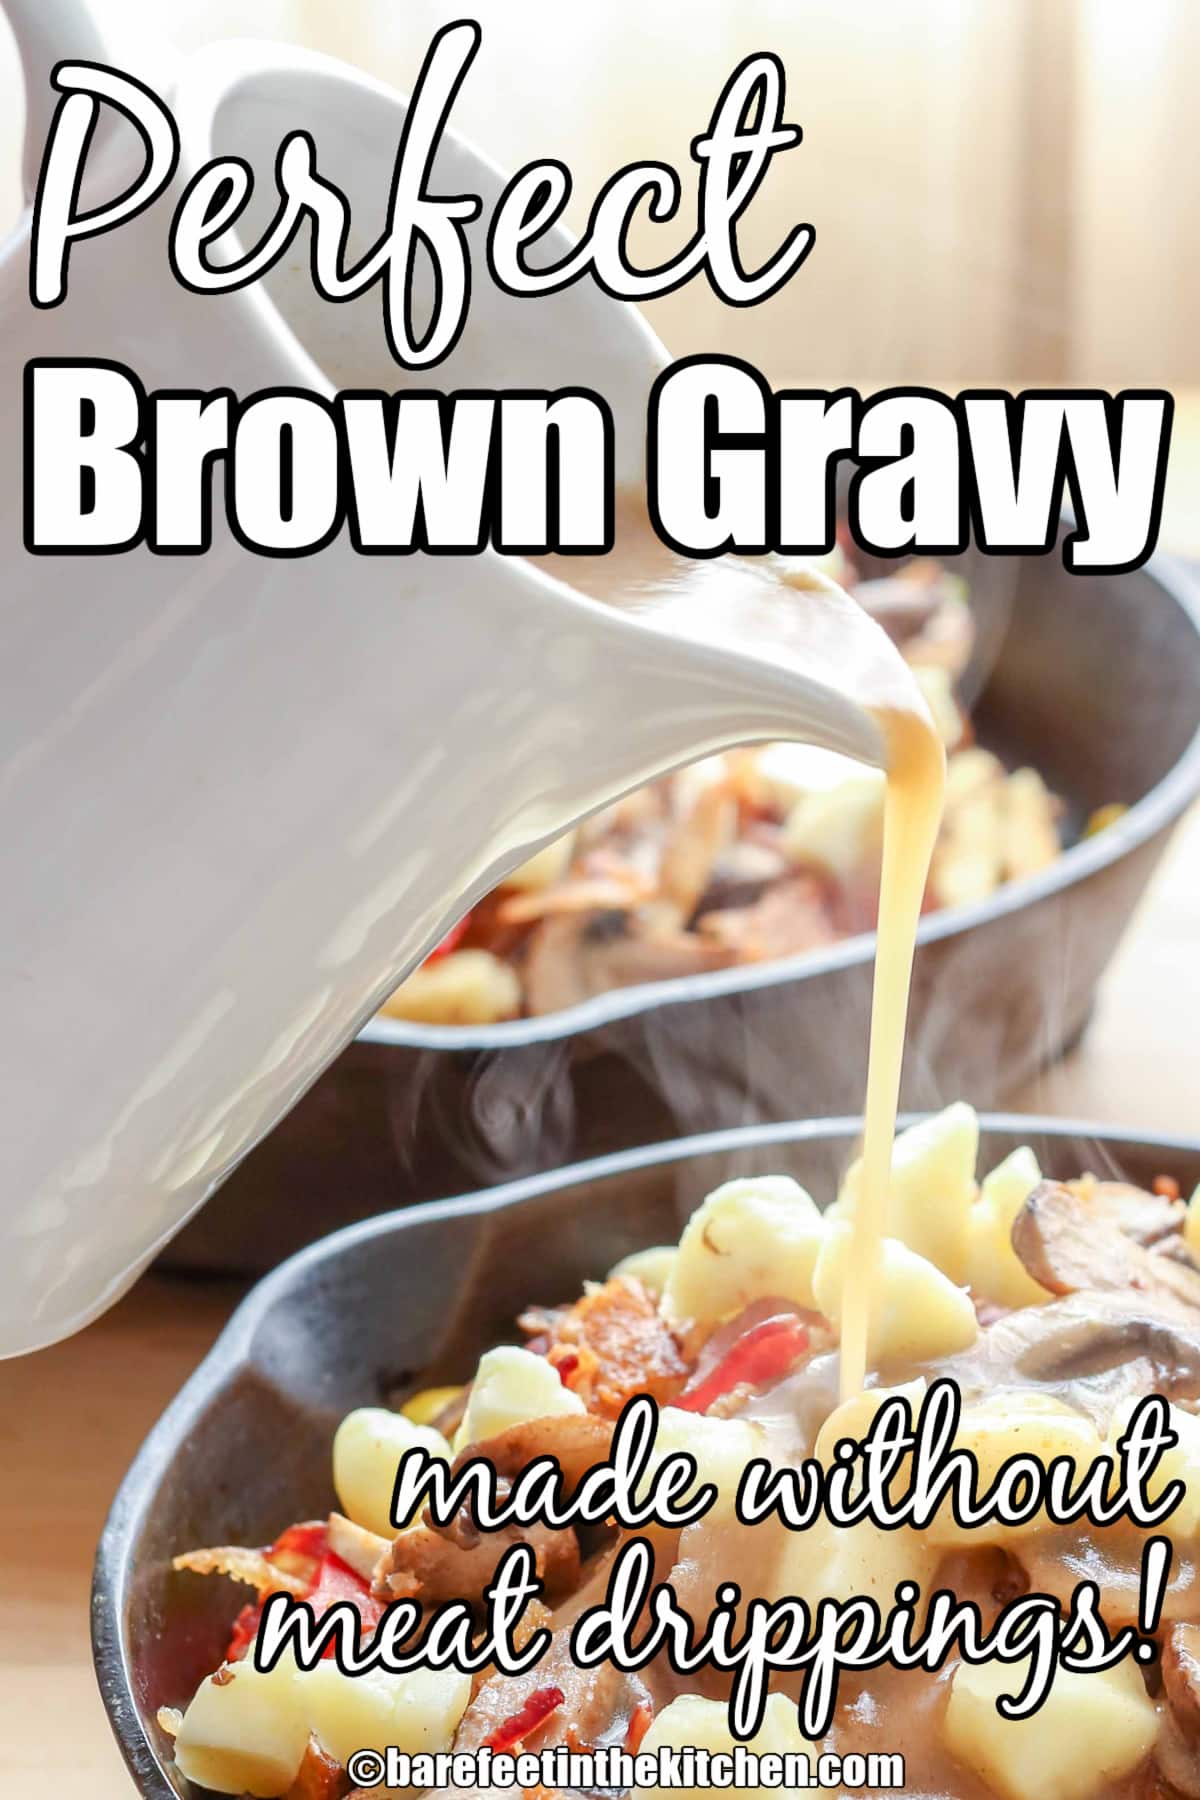 Gravy recipe - easy, from scratch, no drippings